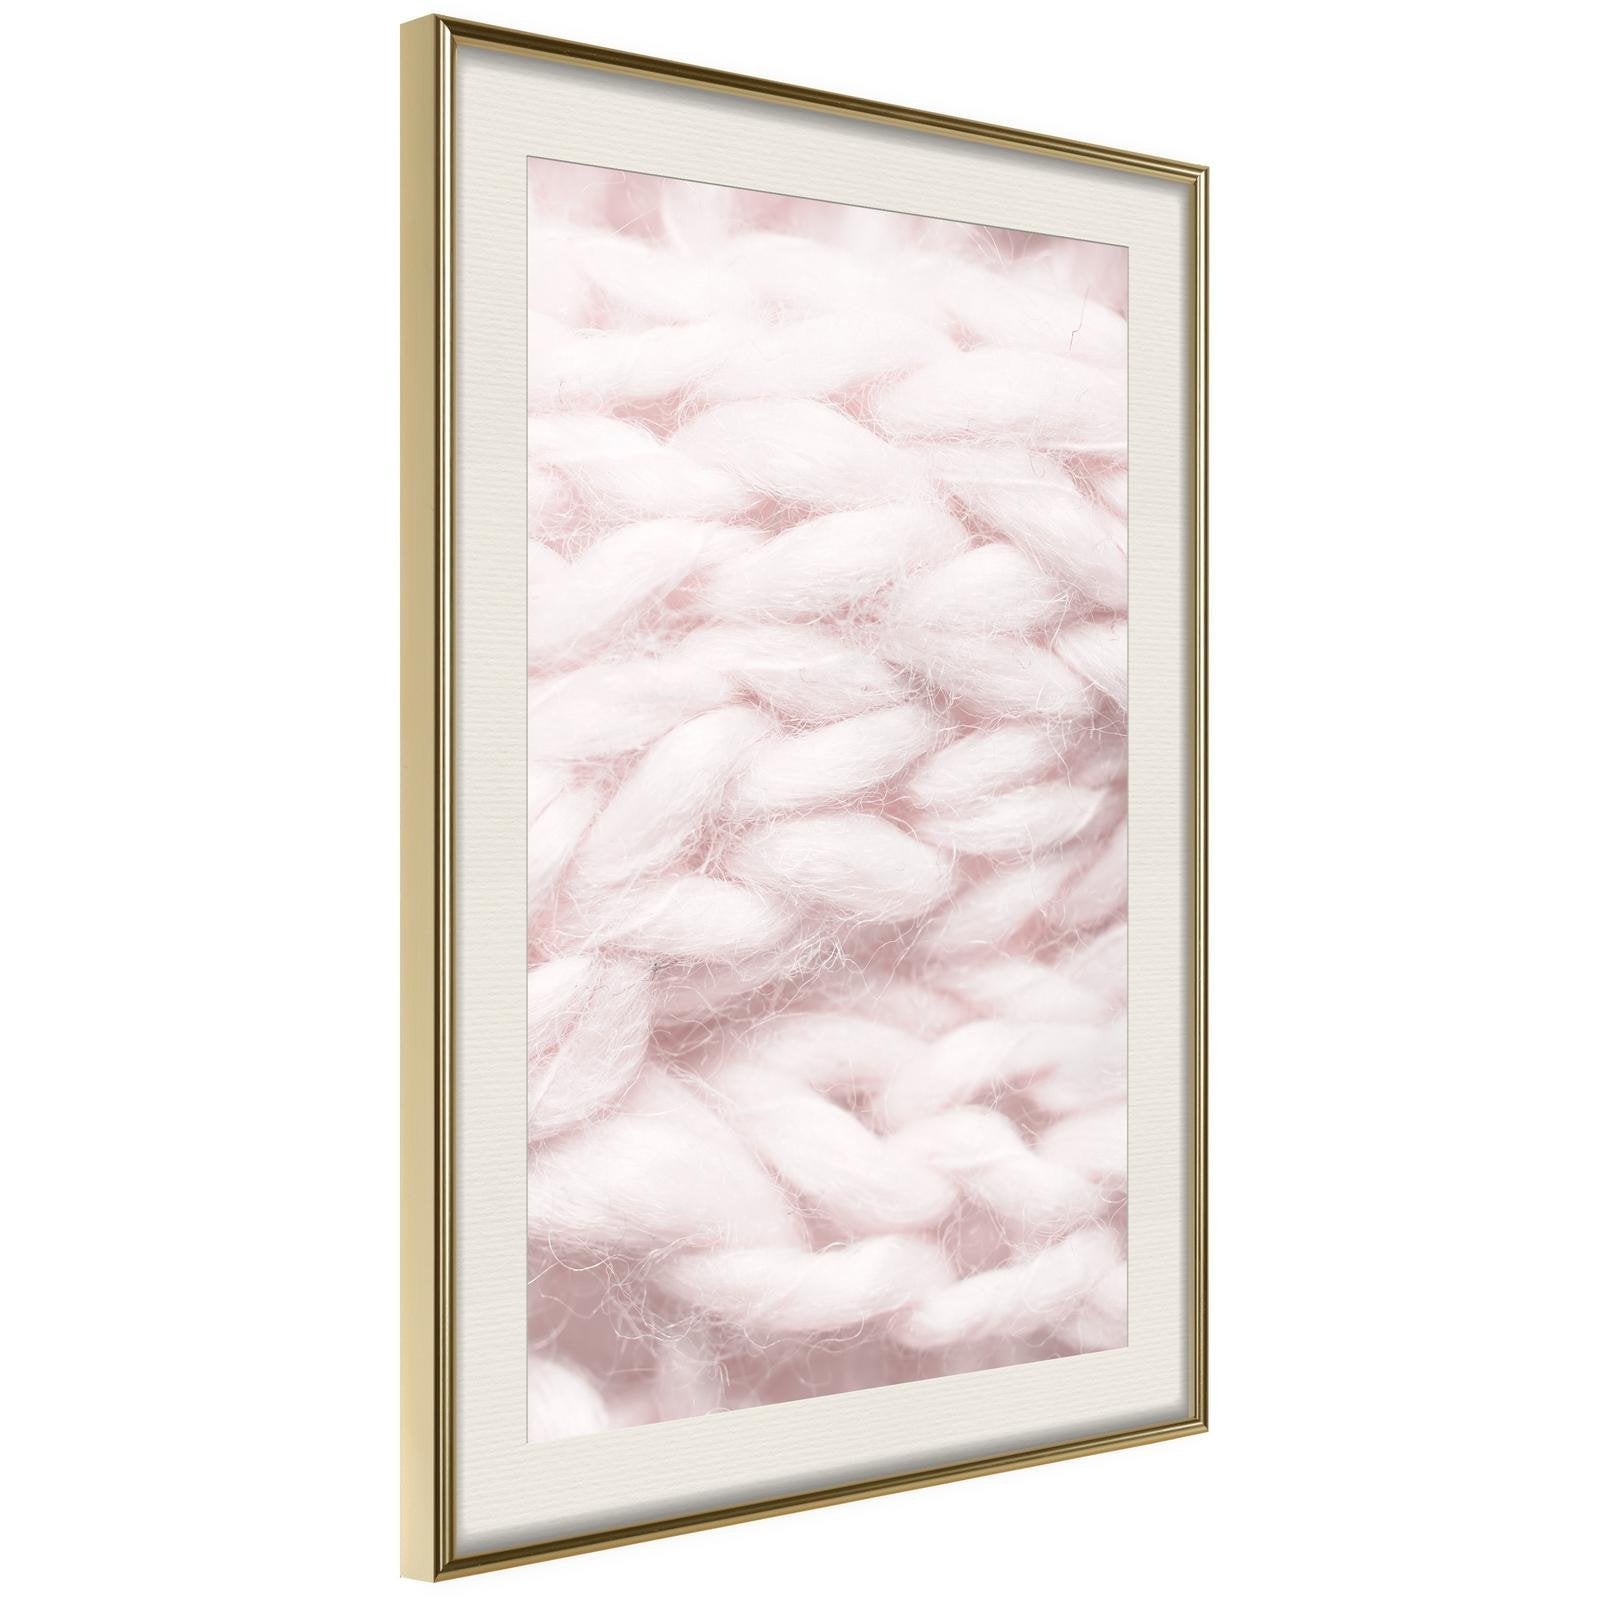 Inramad Poster / Tavla - Pale Pink Knit-Poster Inramad-Artgeist-20x30-Guldram med passepartout-peaceofhome.se